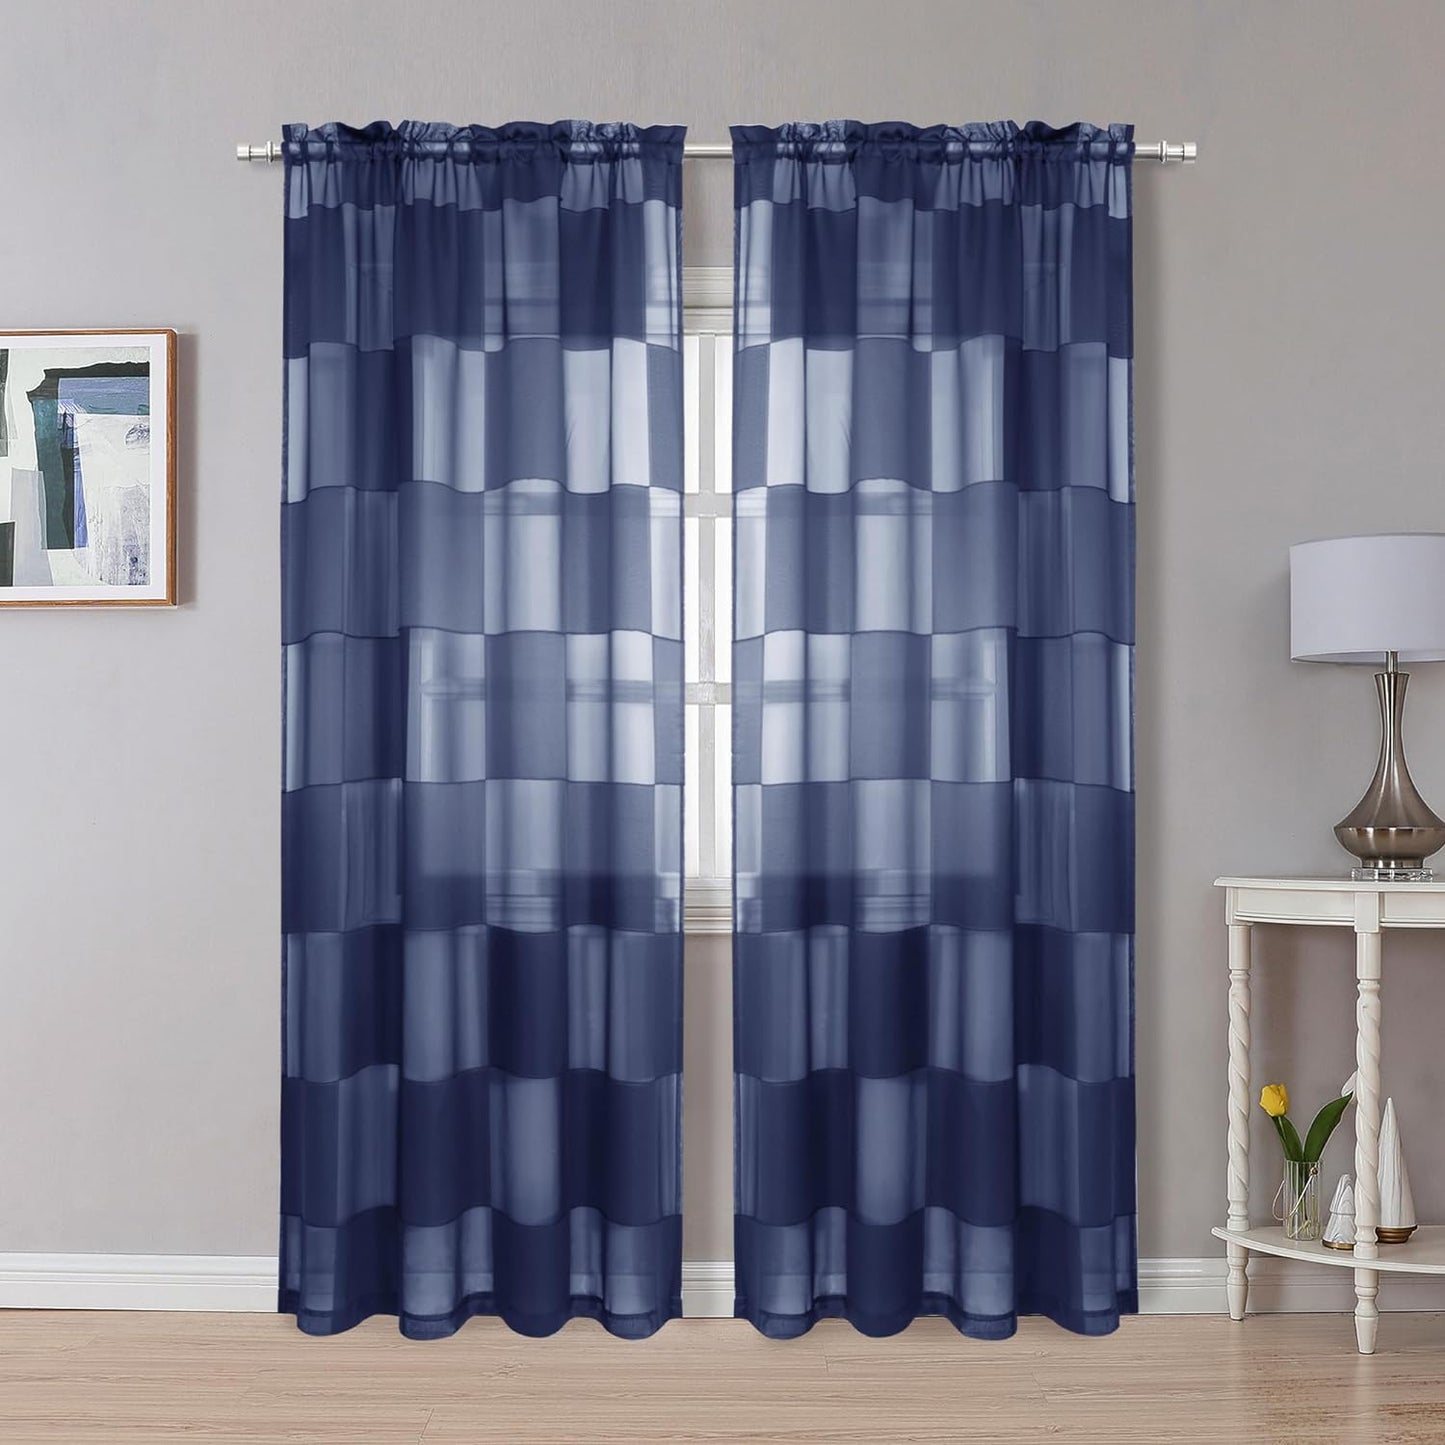 OVZME Sage Green Sheer Bedroom Curtains 84 Inch Length 2 Panels Set, Dual Rod Pocket Clip Checkered Window Curtains for Living Room, Light Filtering & Privacy Sheer Green Drapes, Each 42W X 84L  OVZME Navy Blue 42W X 72L 